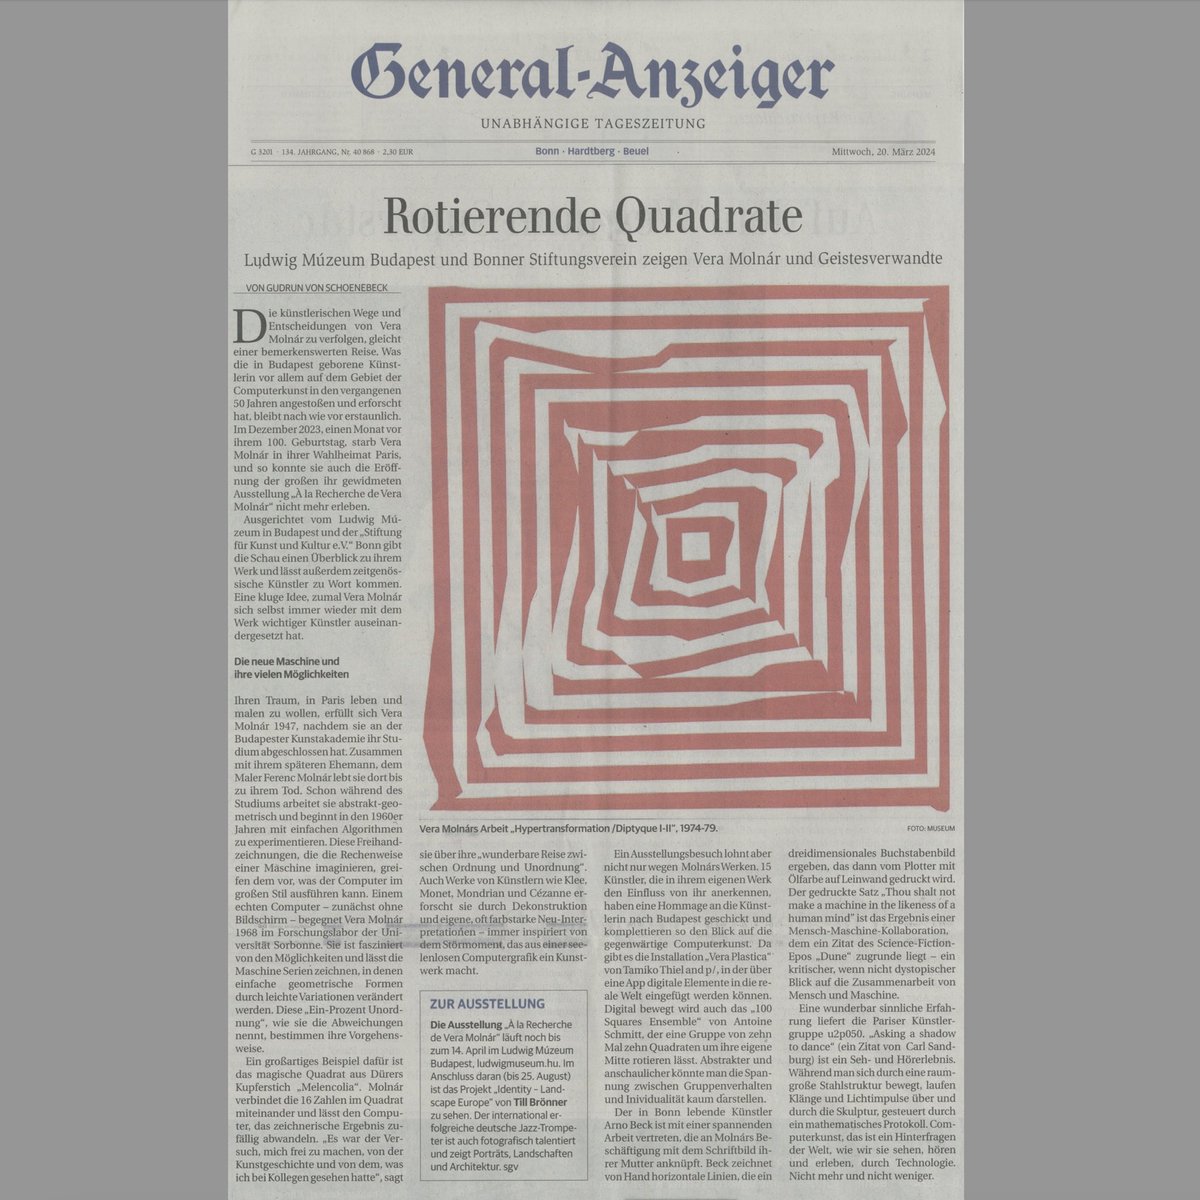 Read “Rotierende Quadrate” by Gudrun von Schoenebeck in the “General-Anzeiger”! Find out about the exhibition “À la Recherche de Vera Molnar” with hommages from Tamiko Thiel and Arno Beck among others at Ludwig Múzeum, Budapest. Until April 14. #GeneralAnzeiger #VeraMolnar